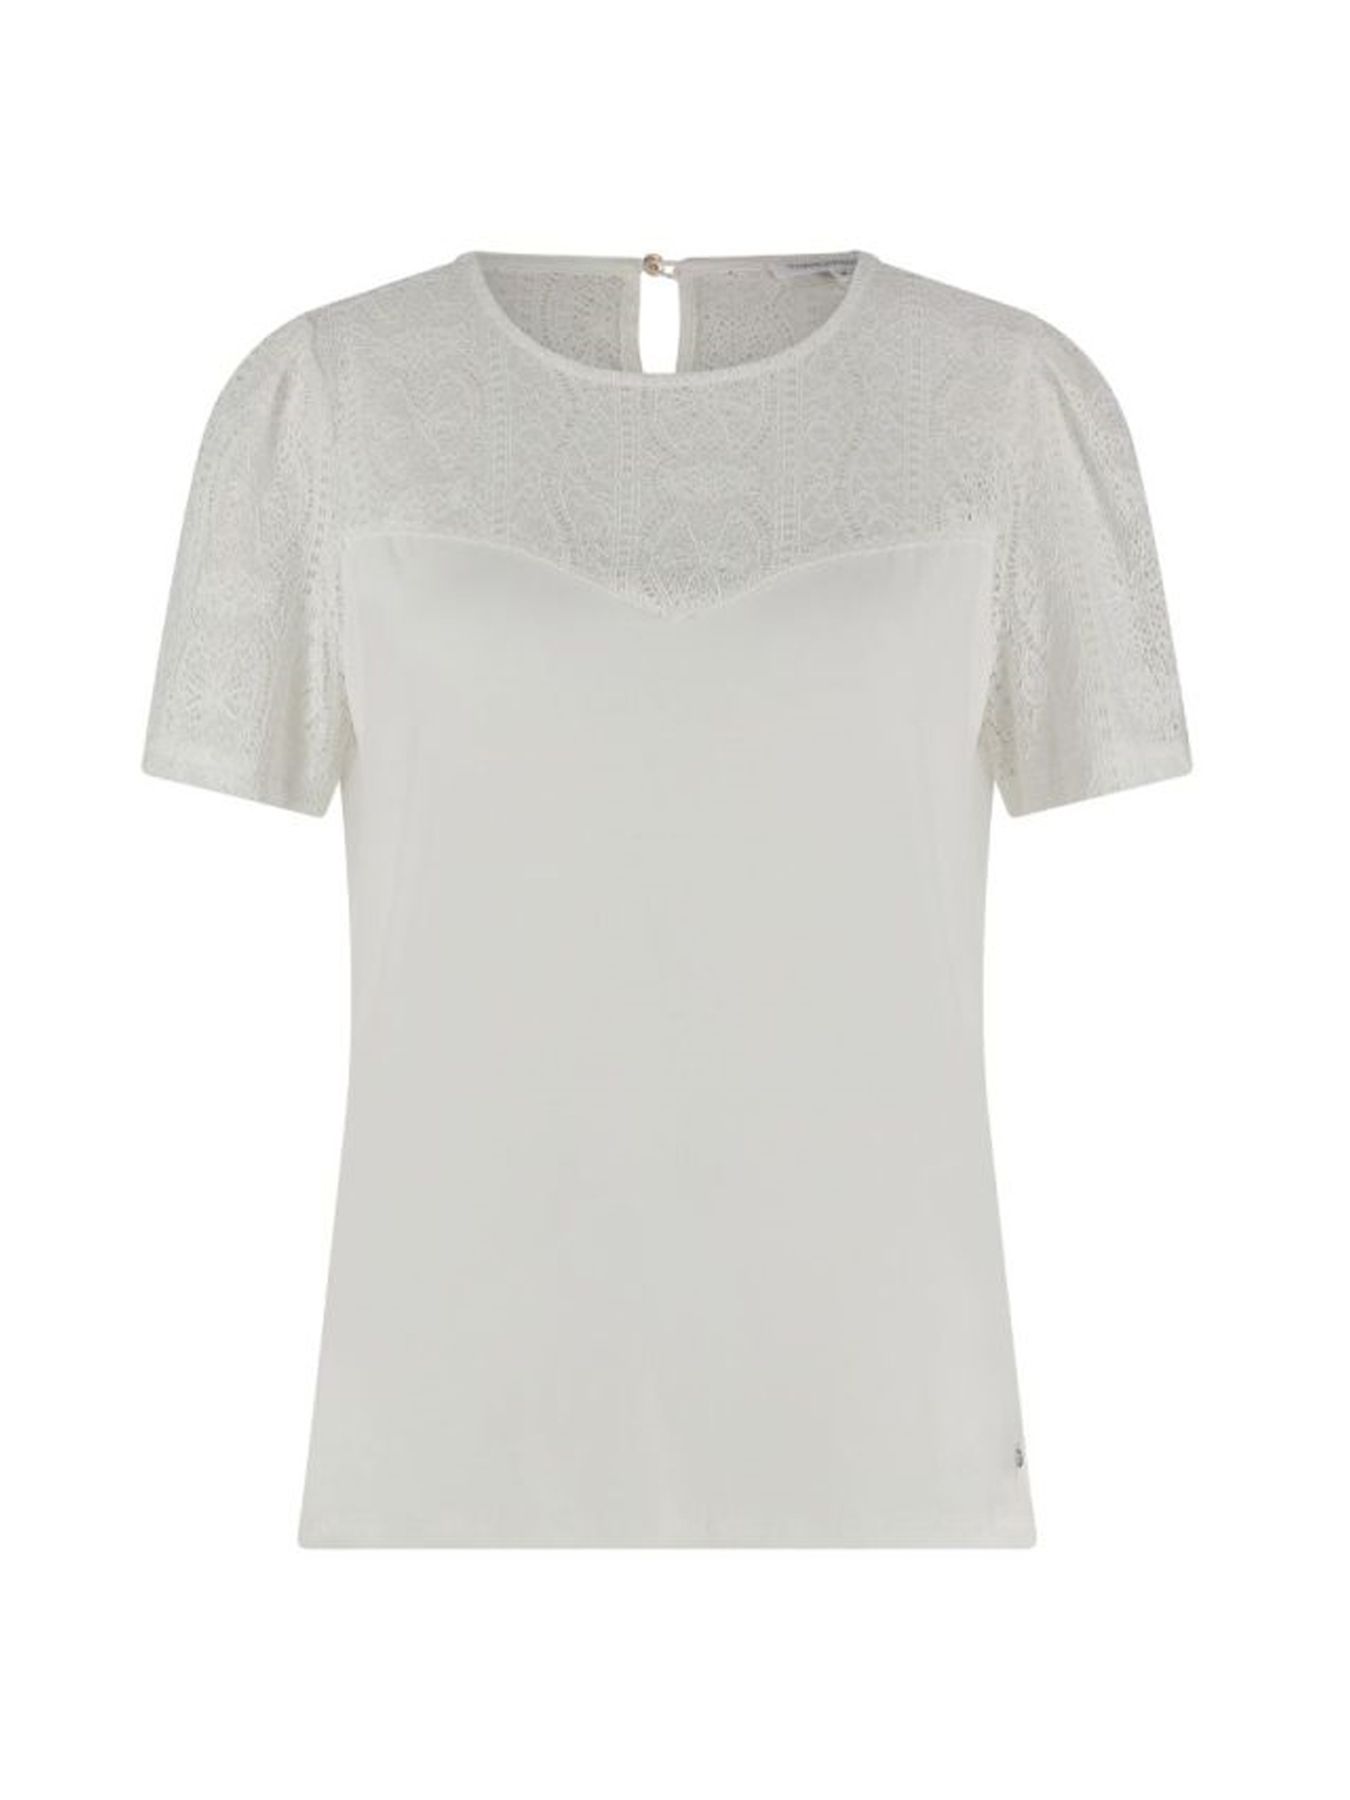 Tramontana Top Jersey Lace S/S Off White 001100 2900140833019